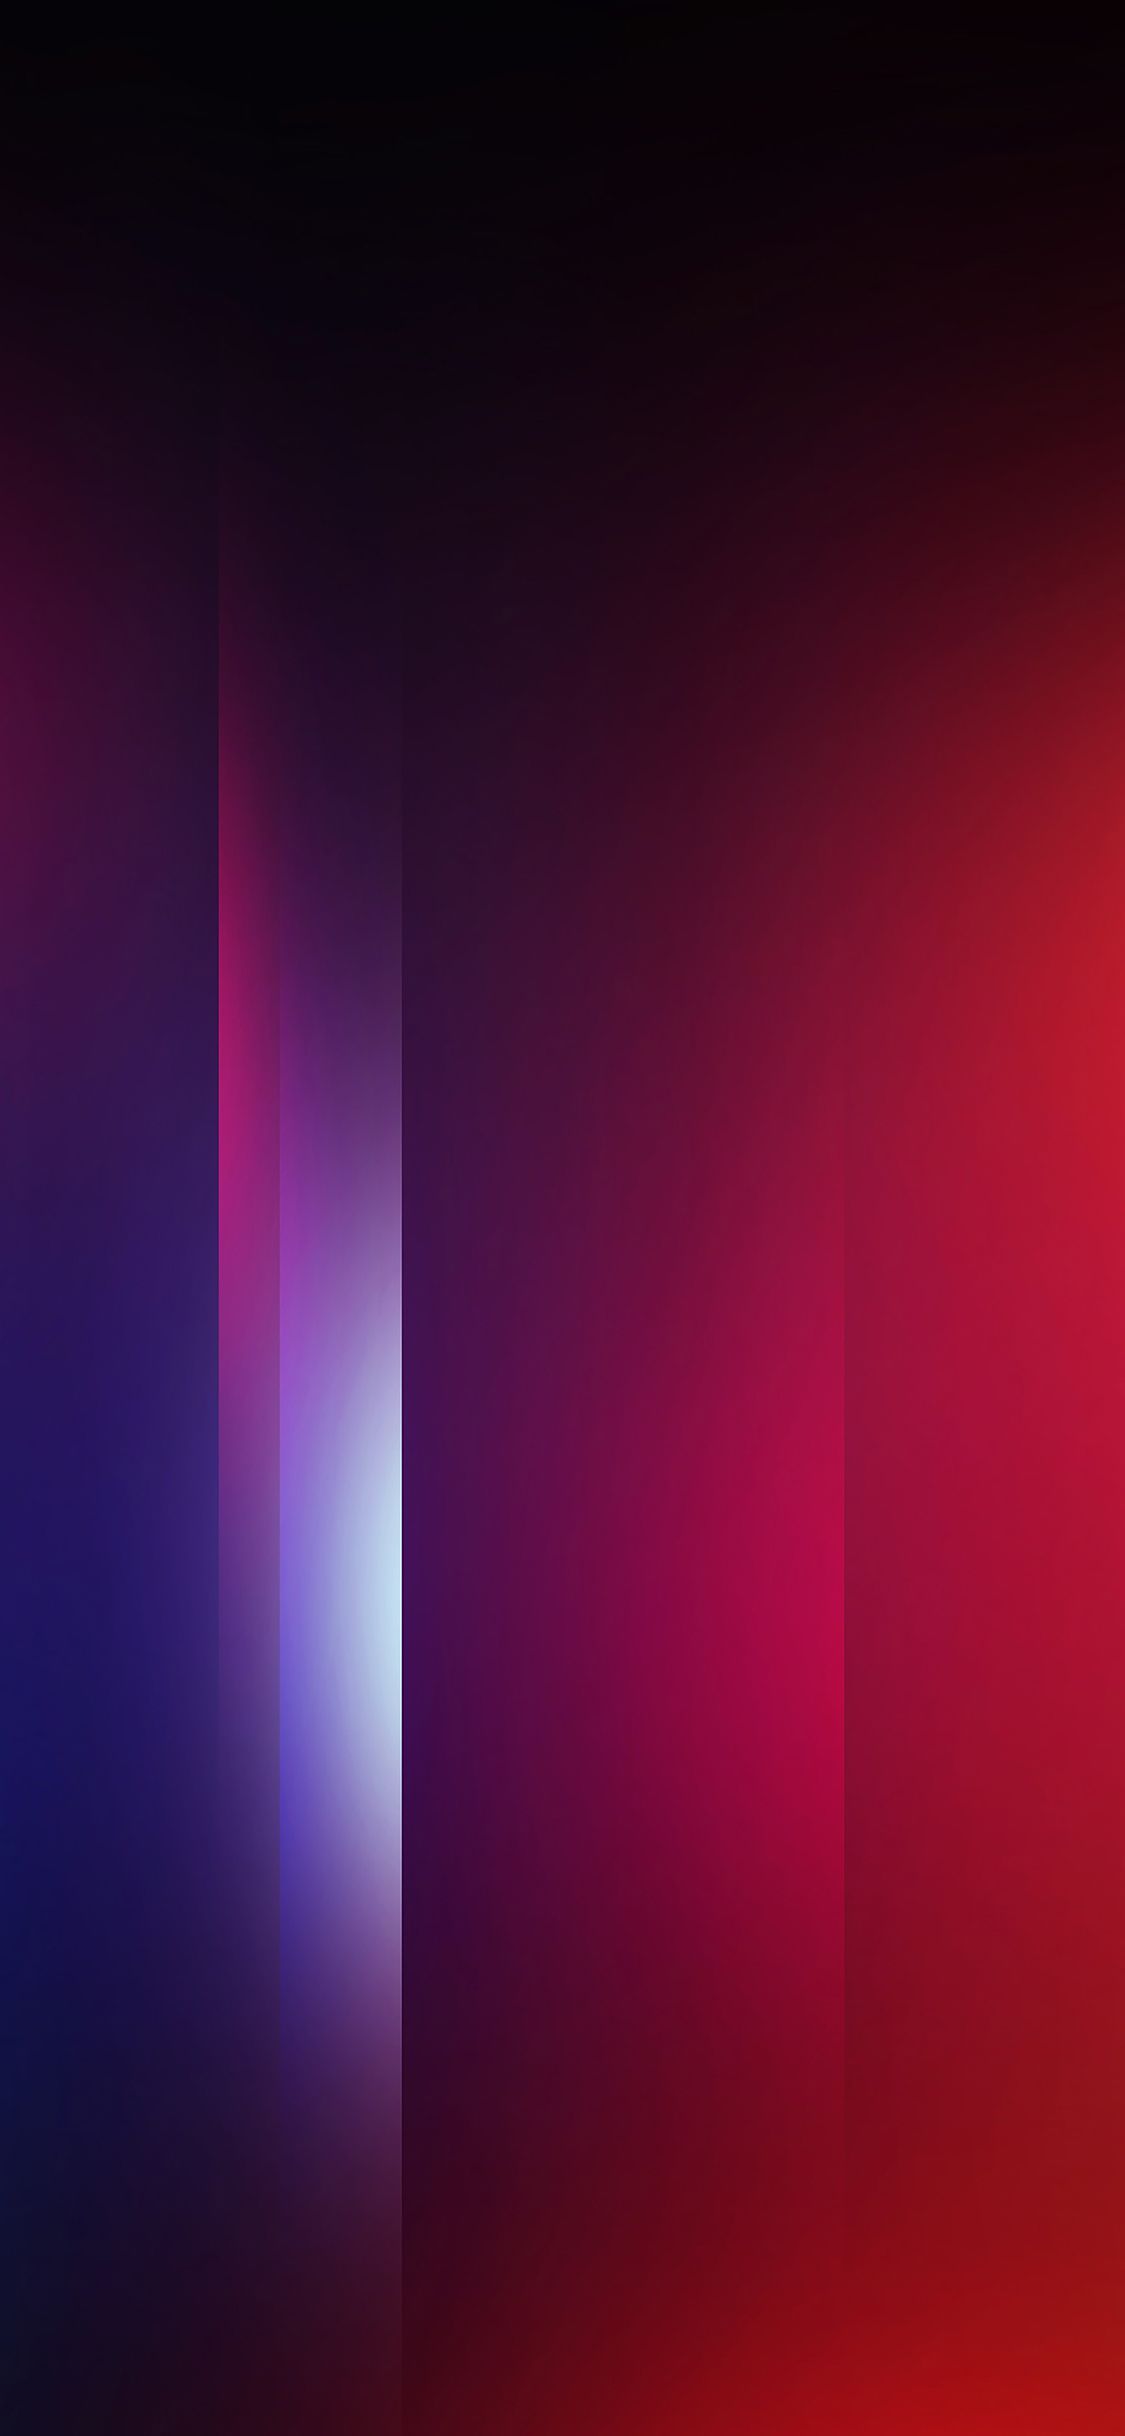 Abstract 4k Wallpaper For iPhone